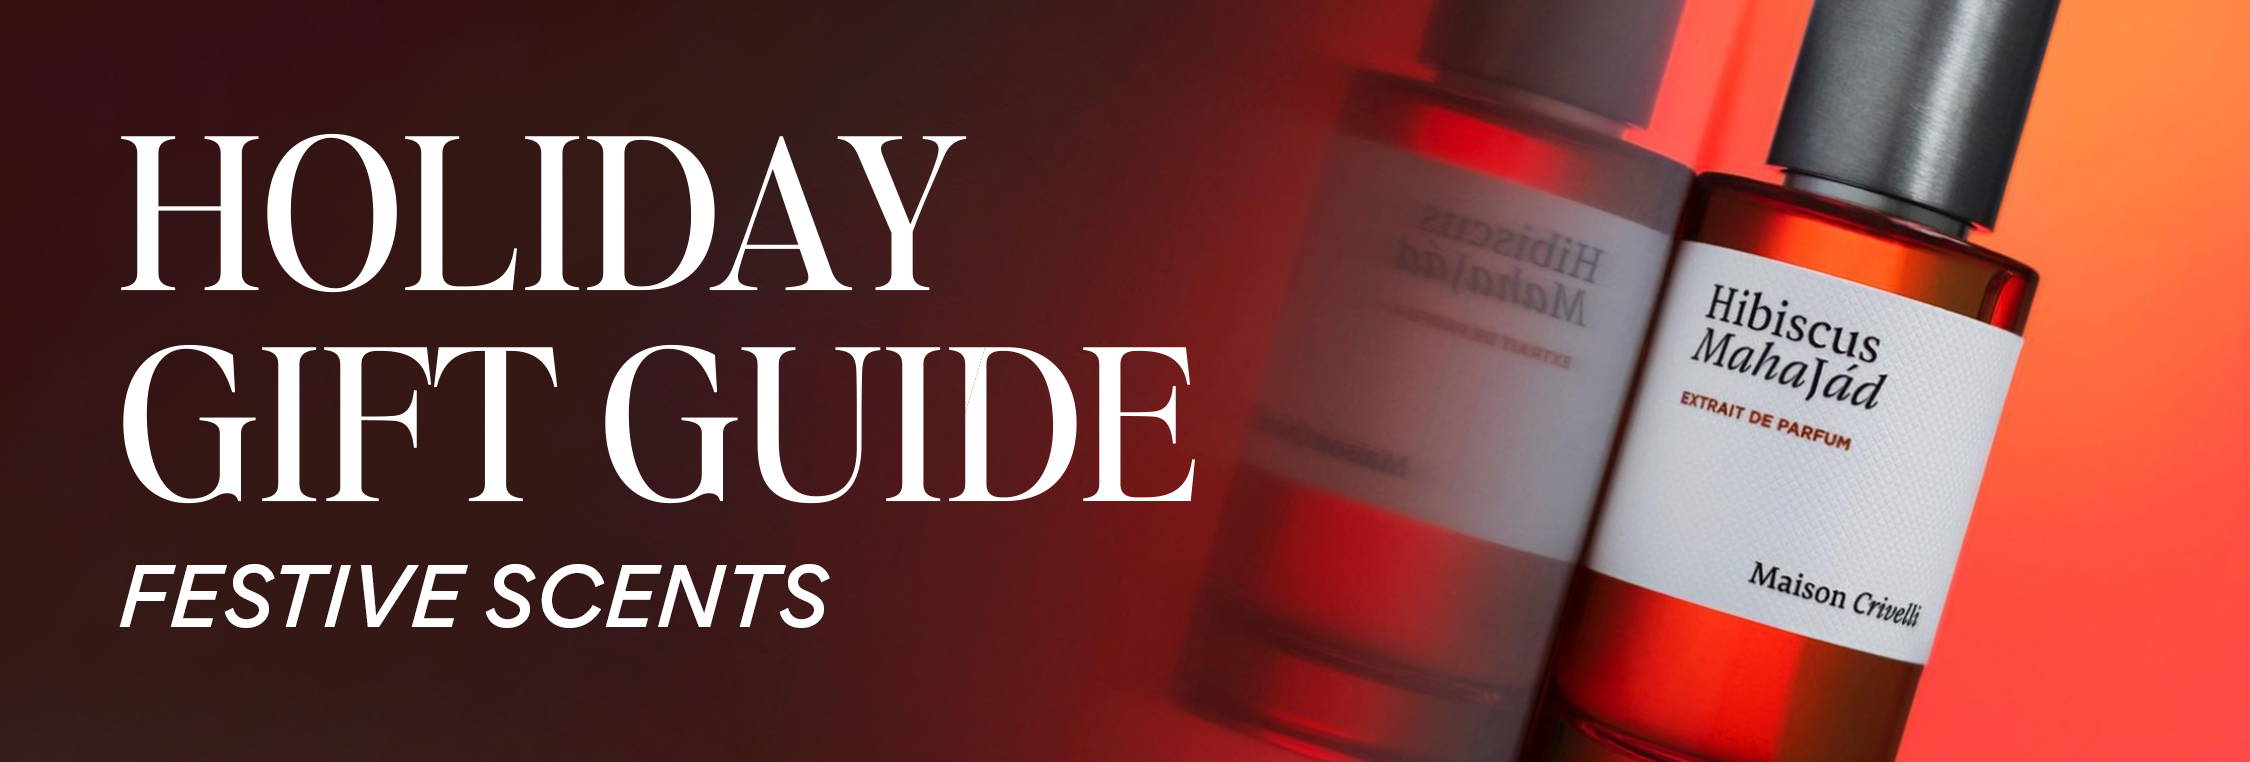 Holiday Gift Guide Festive Scents